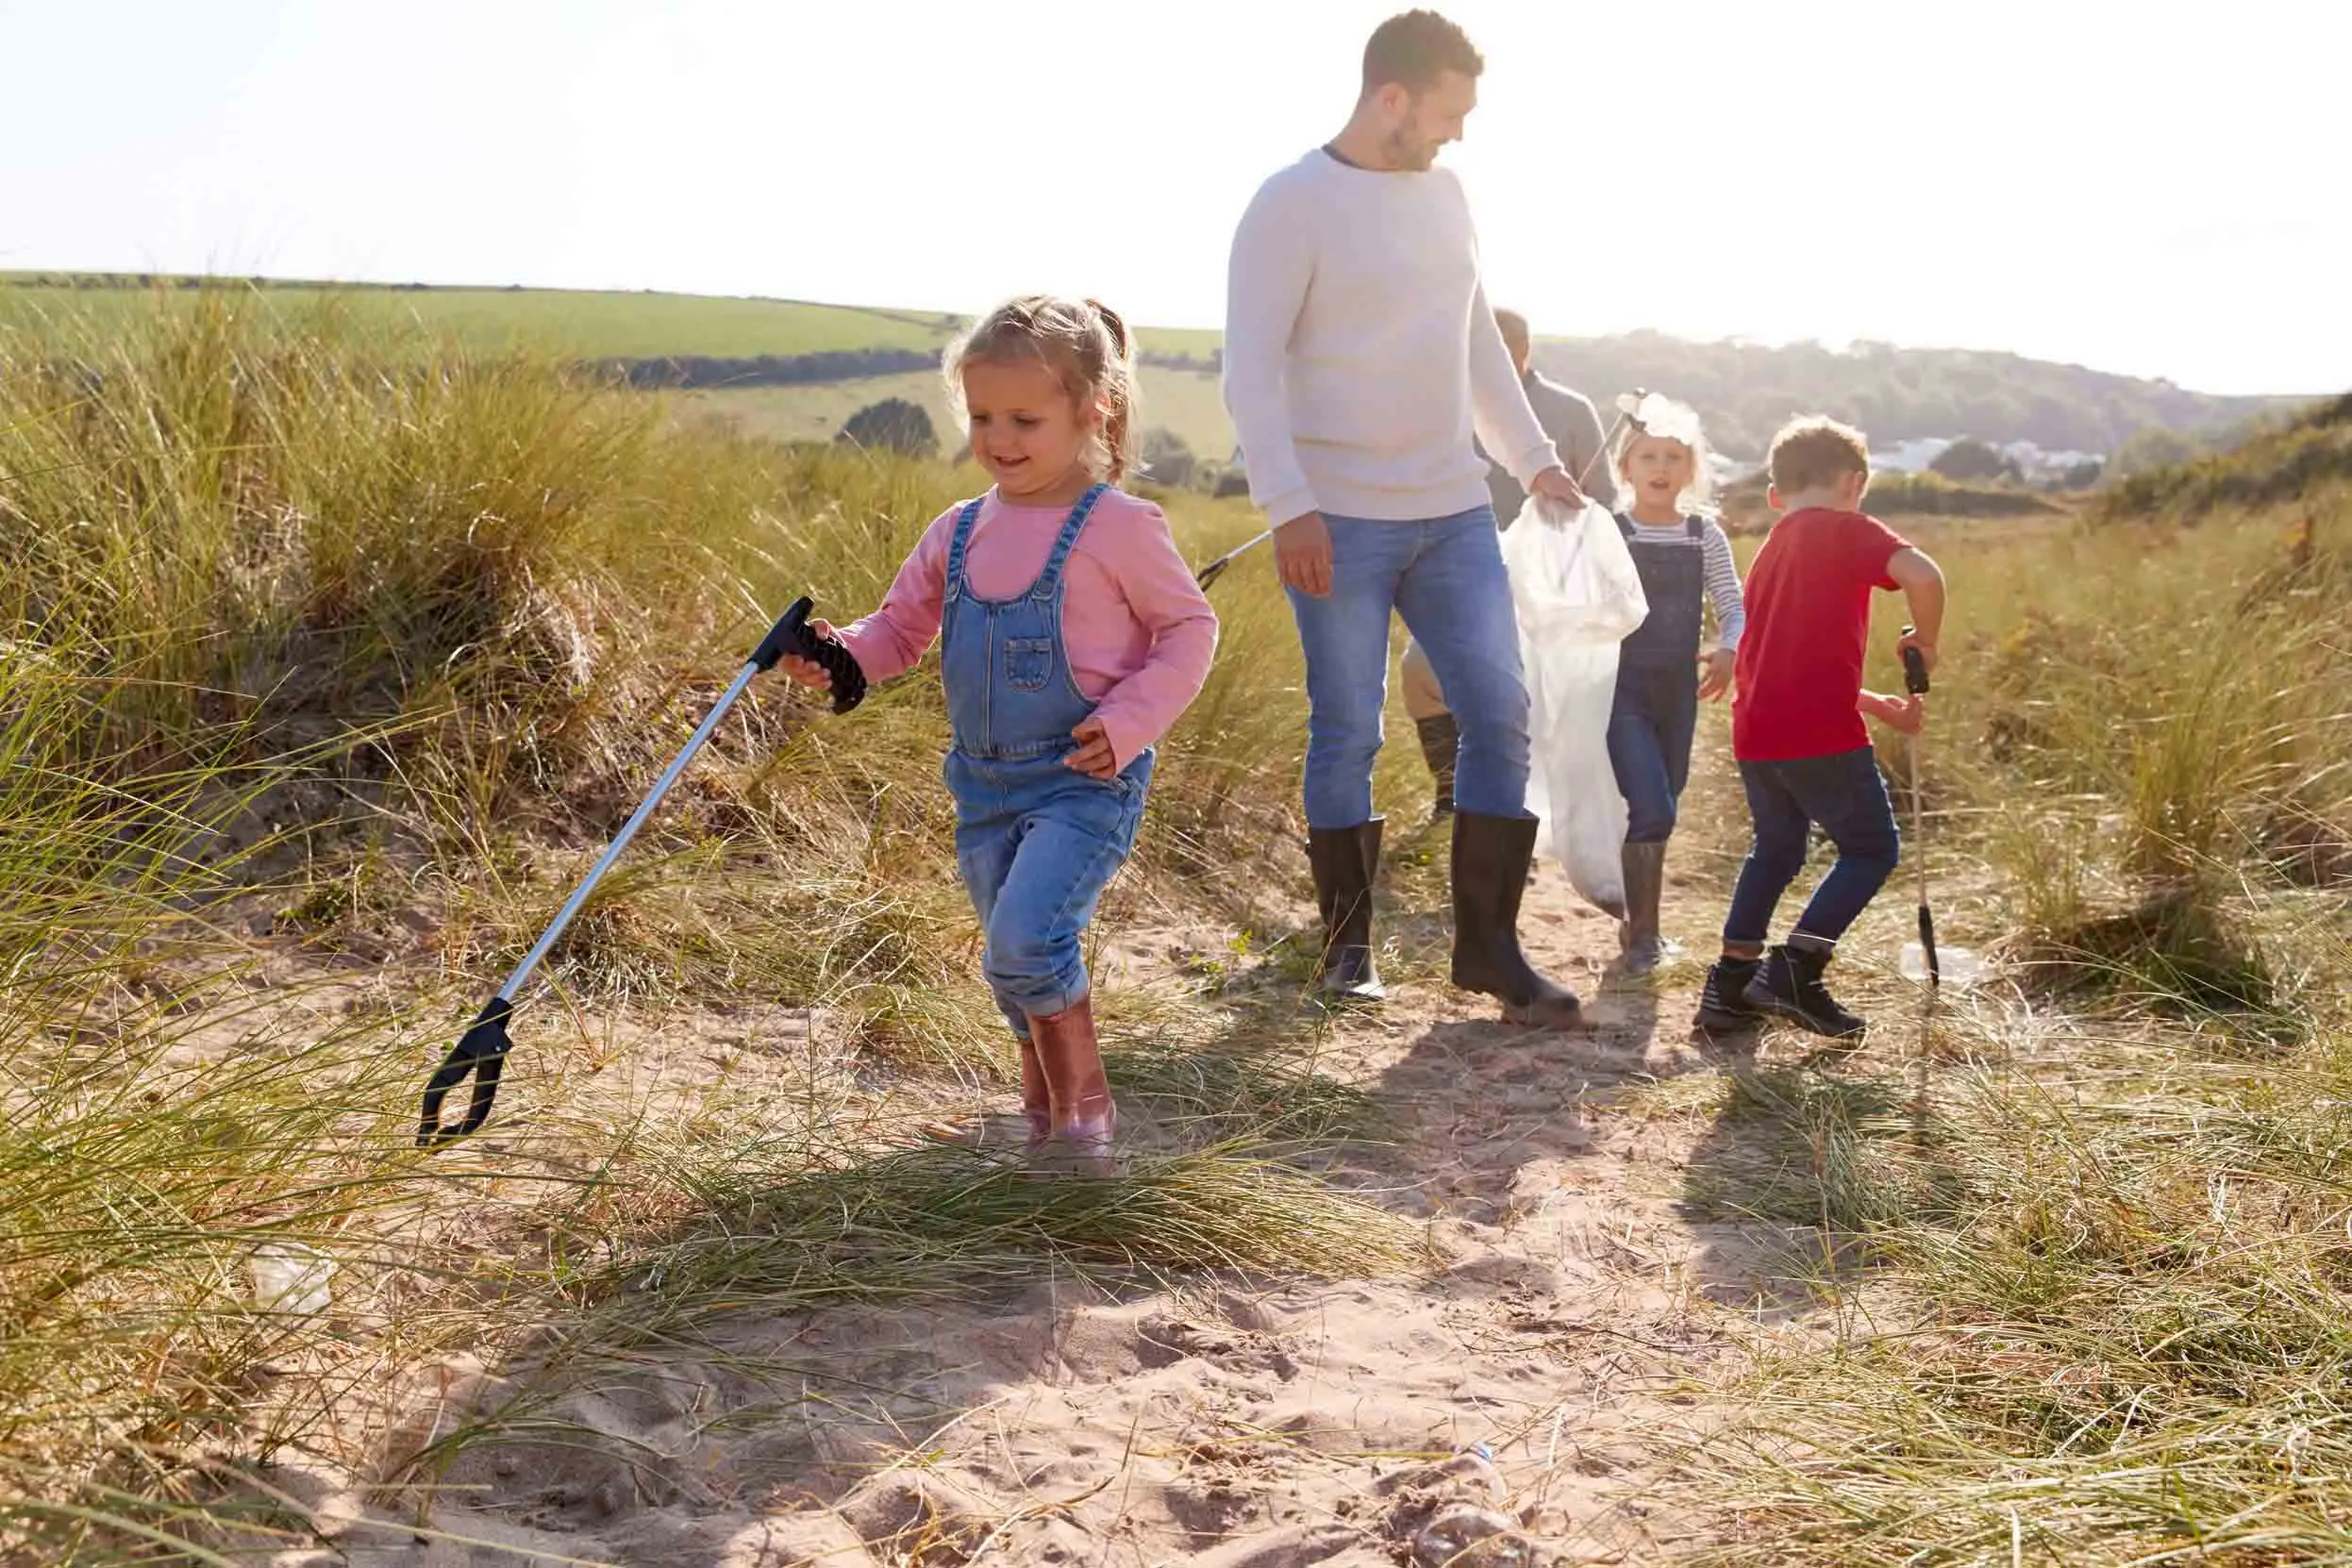 One adult and three young children on a sand dune, litter picking with a clear binbag and litter pickers.